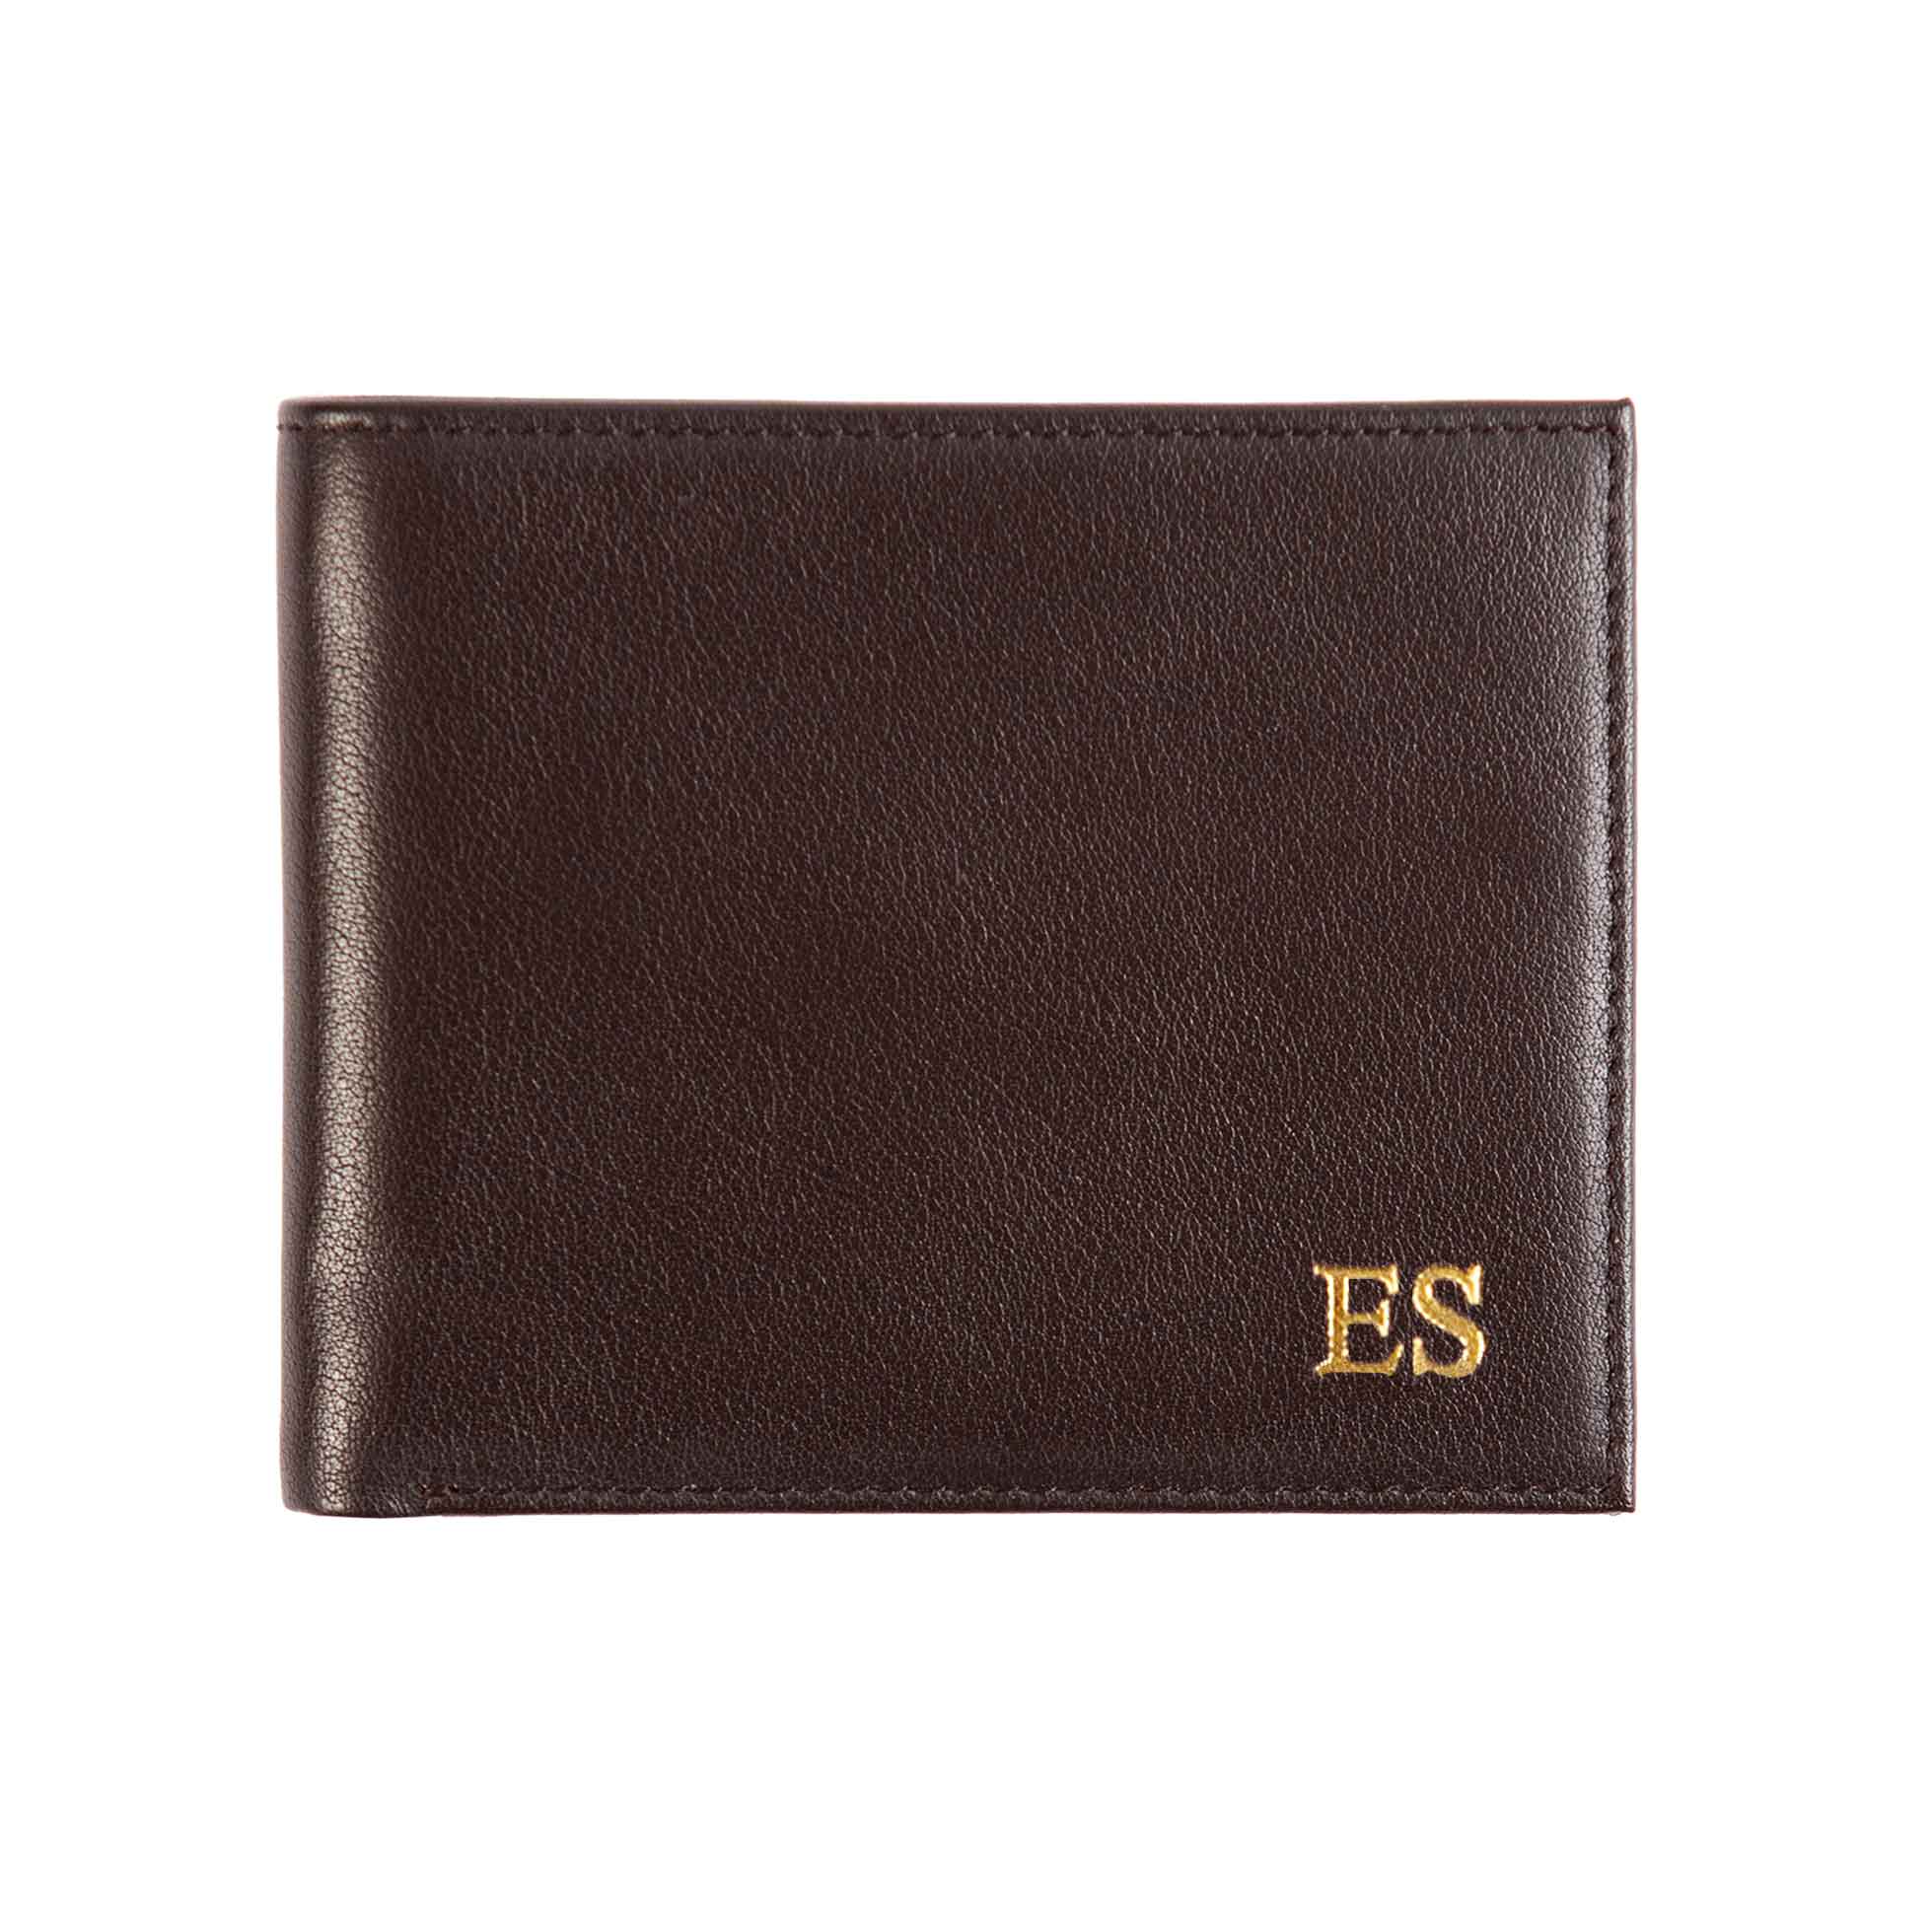 Genuine leather wallet with monogram